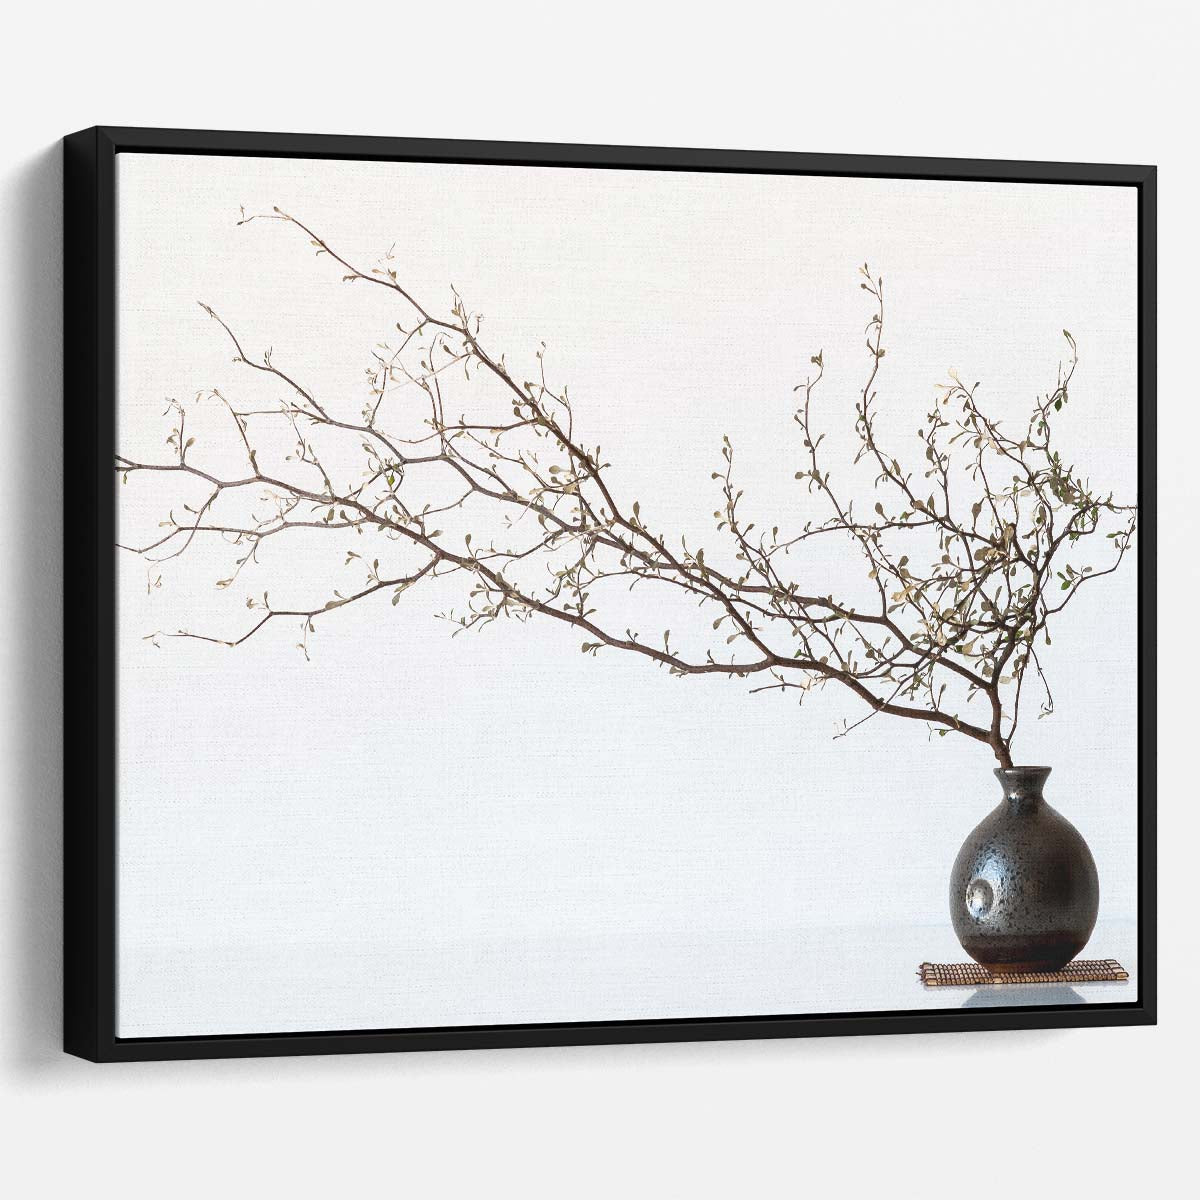 Minimalist Spring Vase & Twig Branch Wall Art by Luxuriance Designs. Made in USA.